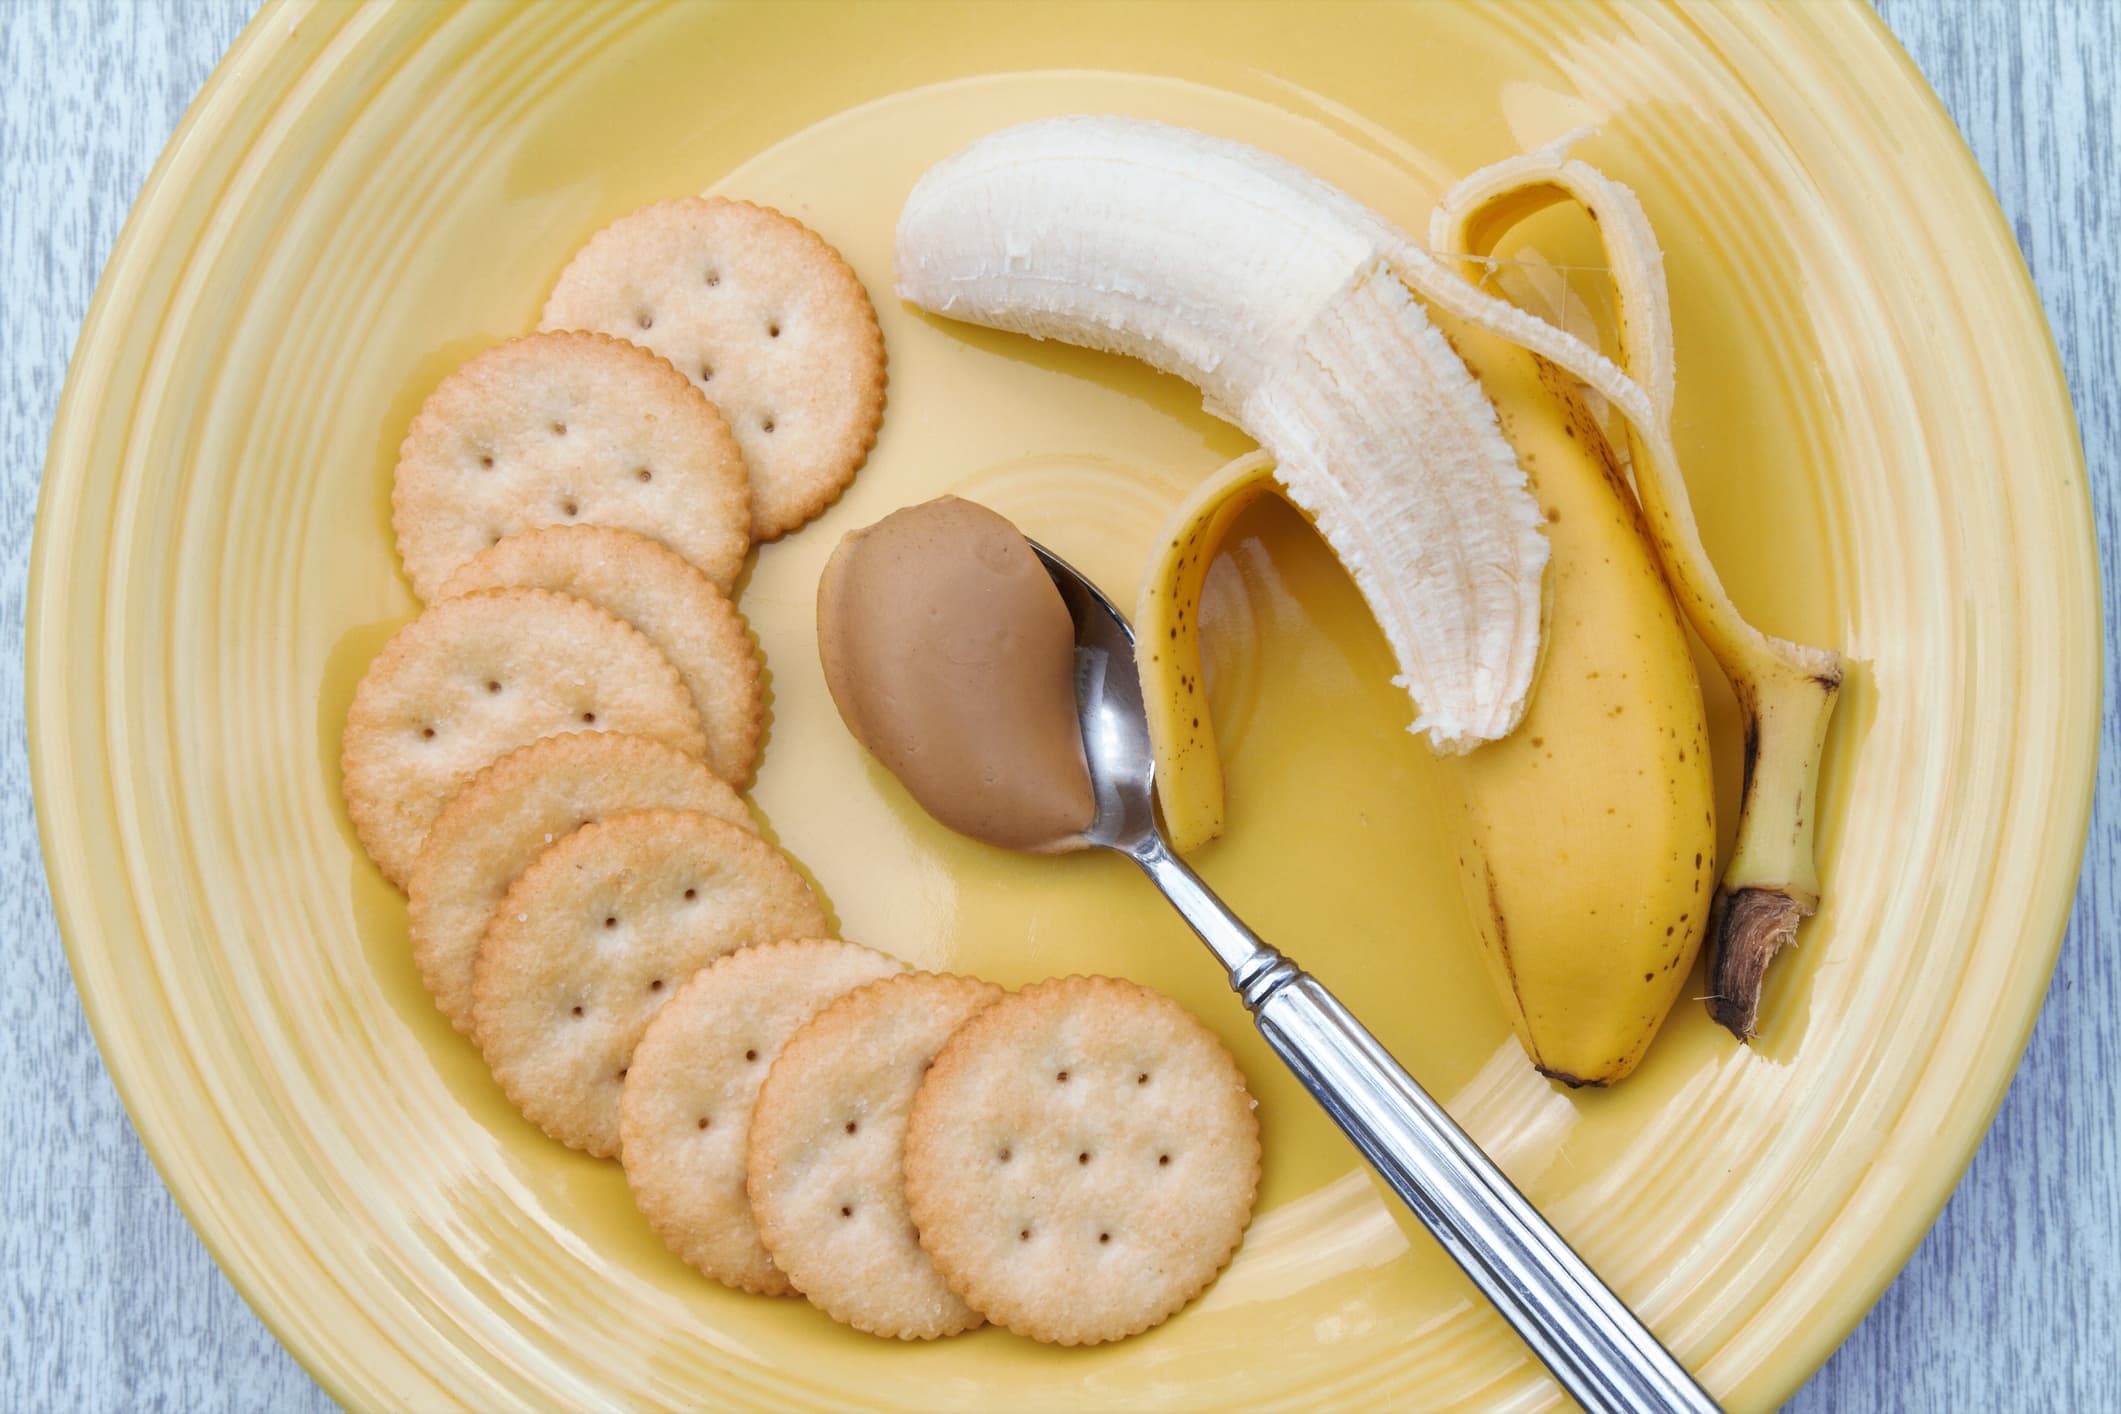 Peanut butter on spoon with banana and crackers.